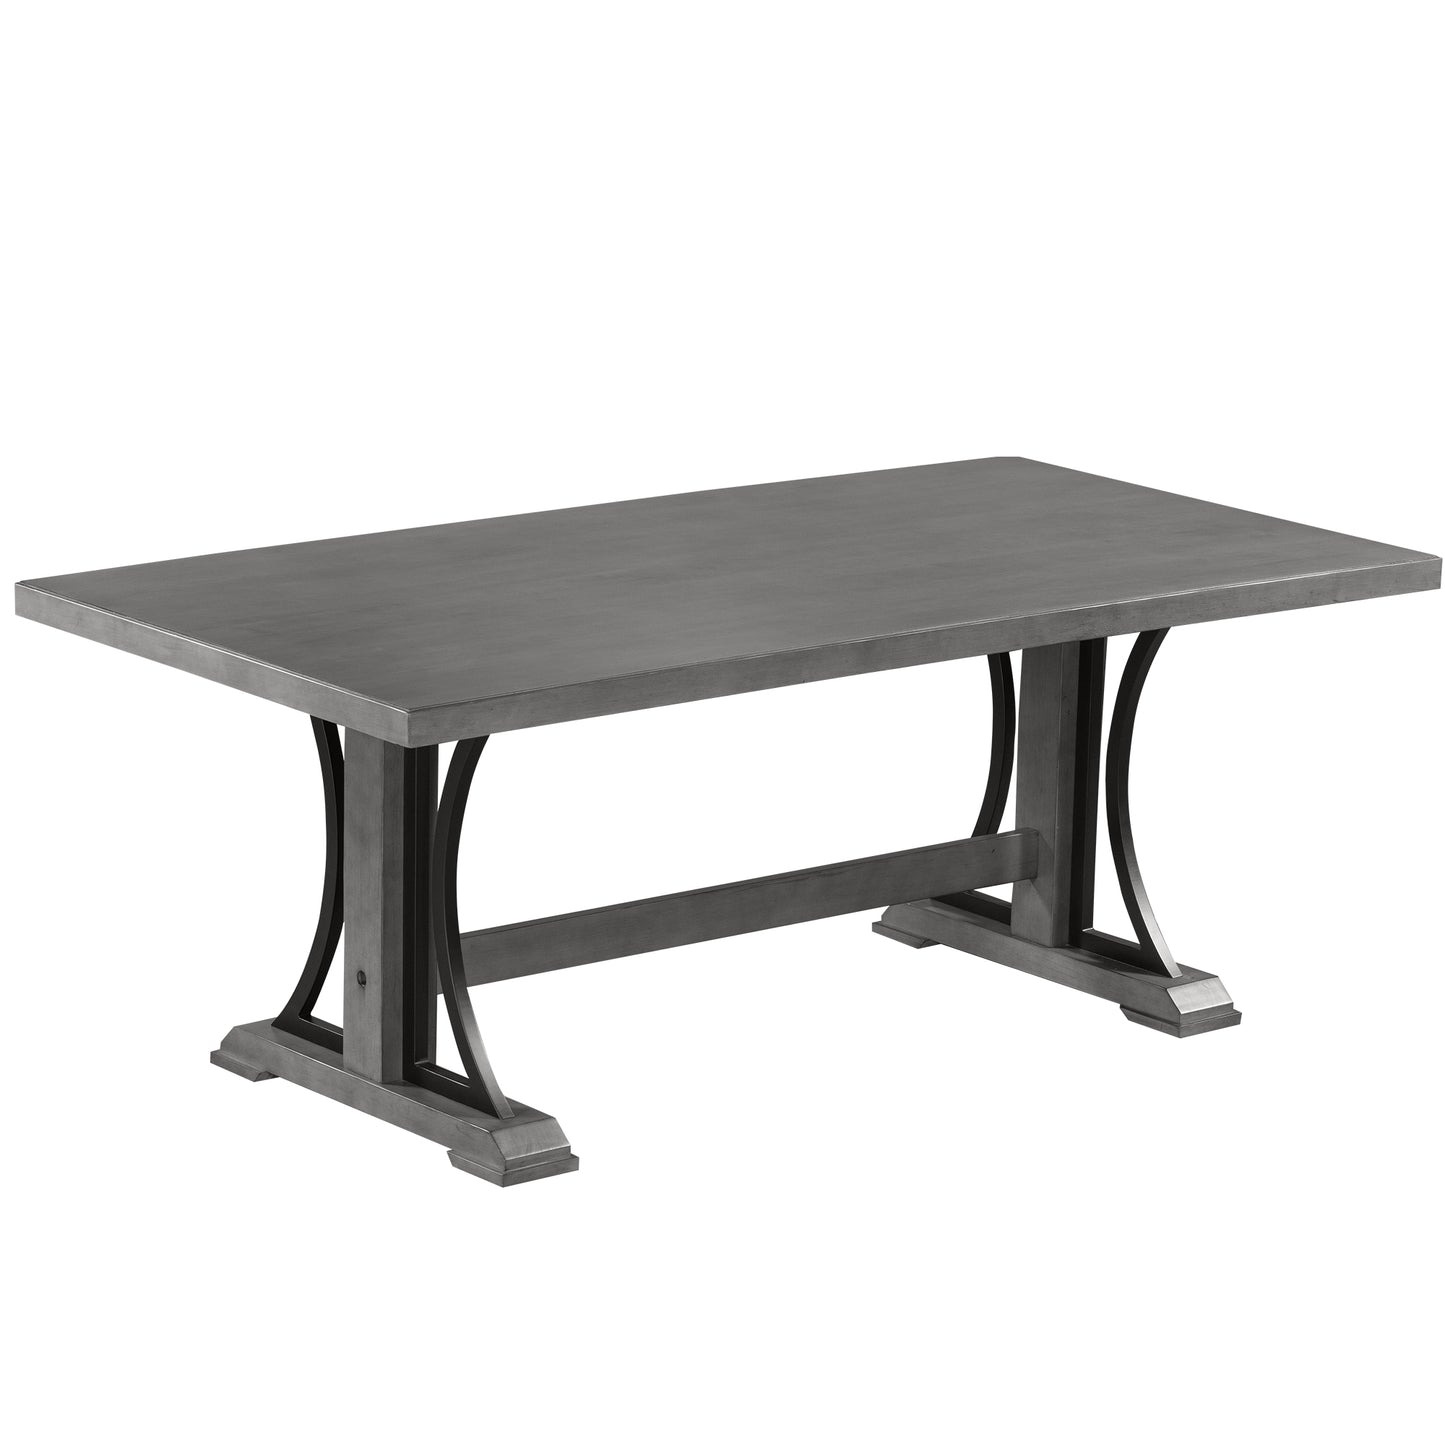 TREXM Retro Style Dining Table 78" Wood Rectangular Table, Seats up to 8 (Gray)